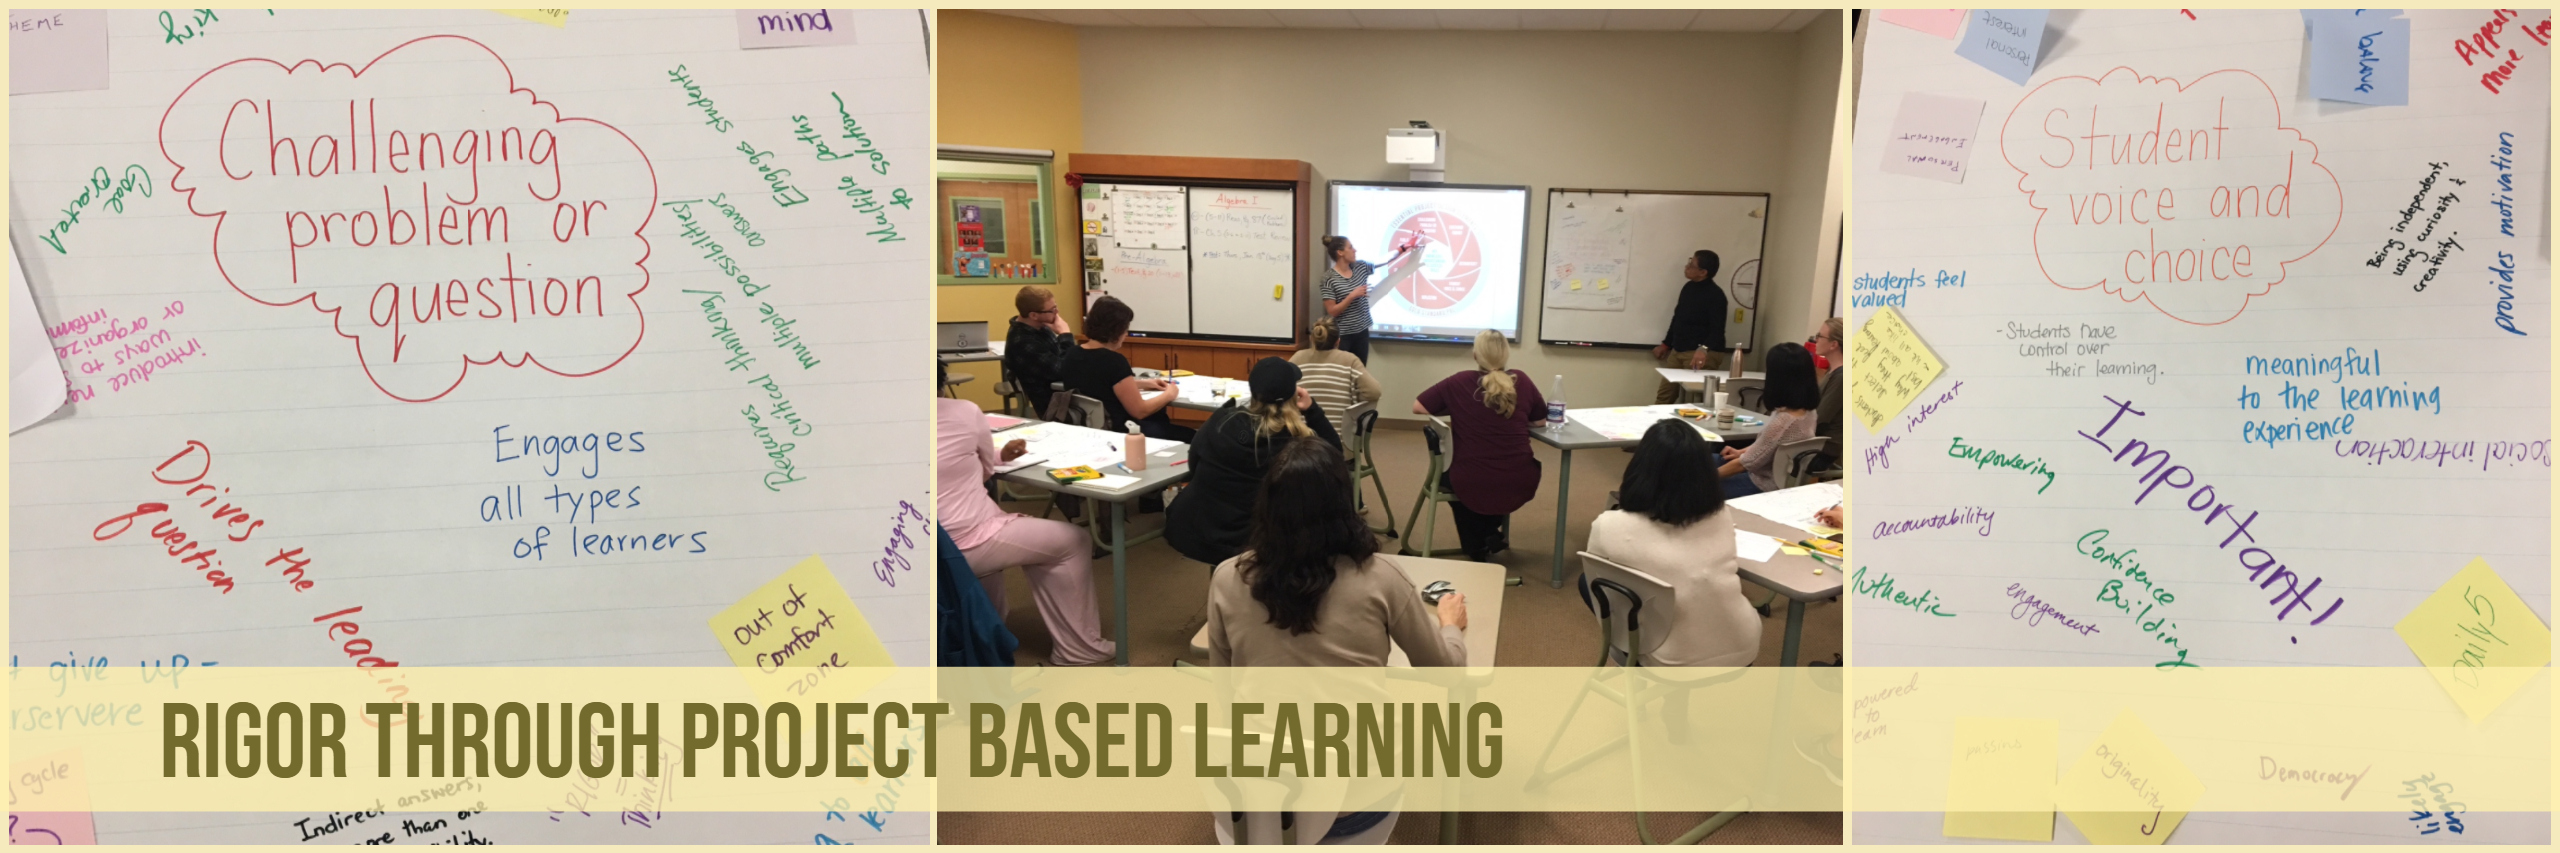 Rigor Through Project Based Learning